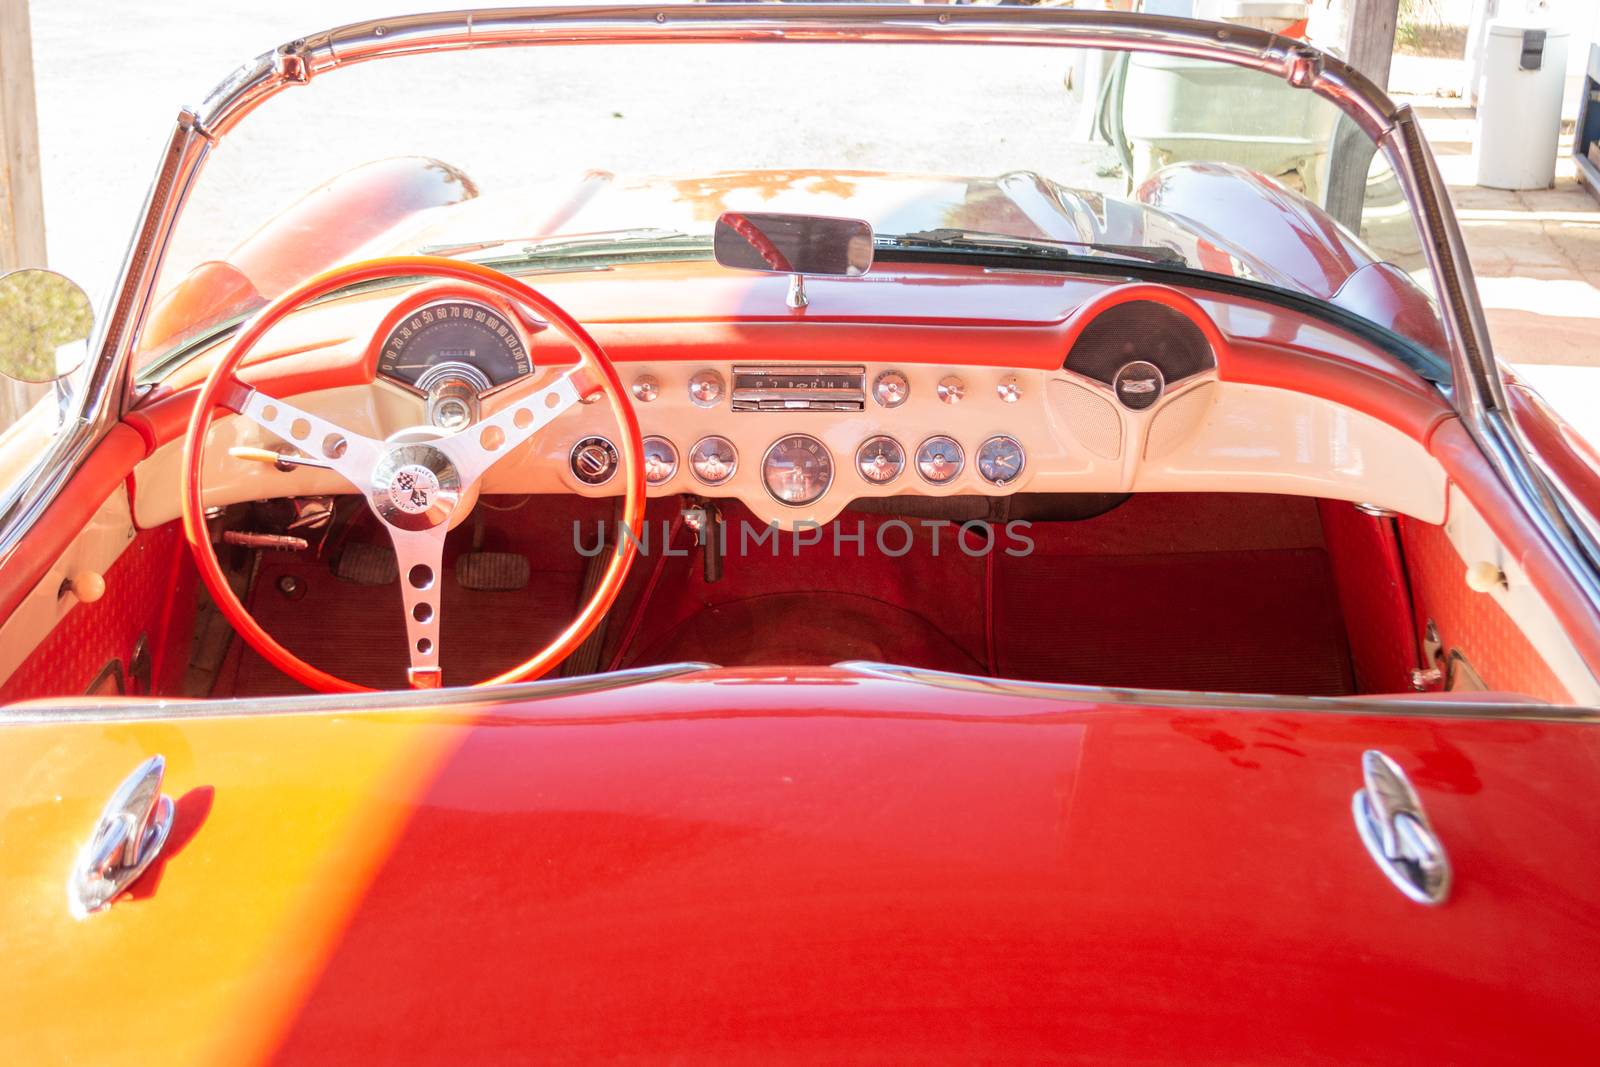 Interior of Chevrolet Corvette C1 50's edition, convertible, steering wheel and seats, fully restored by kb79